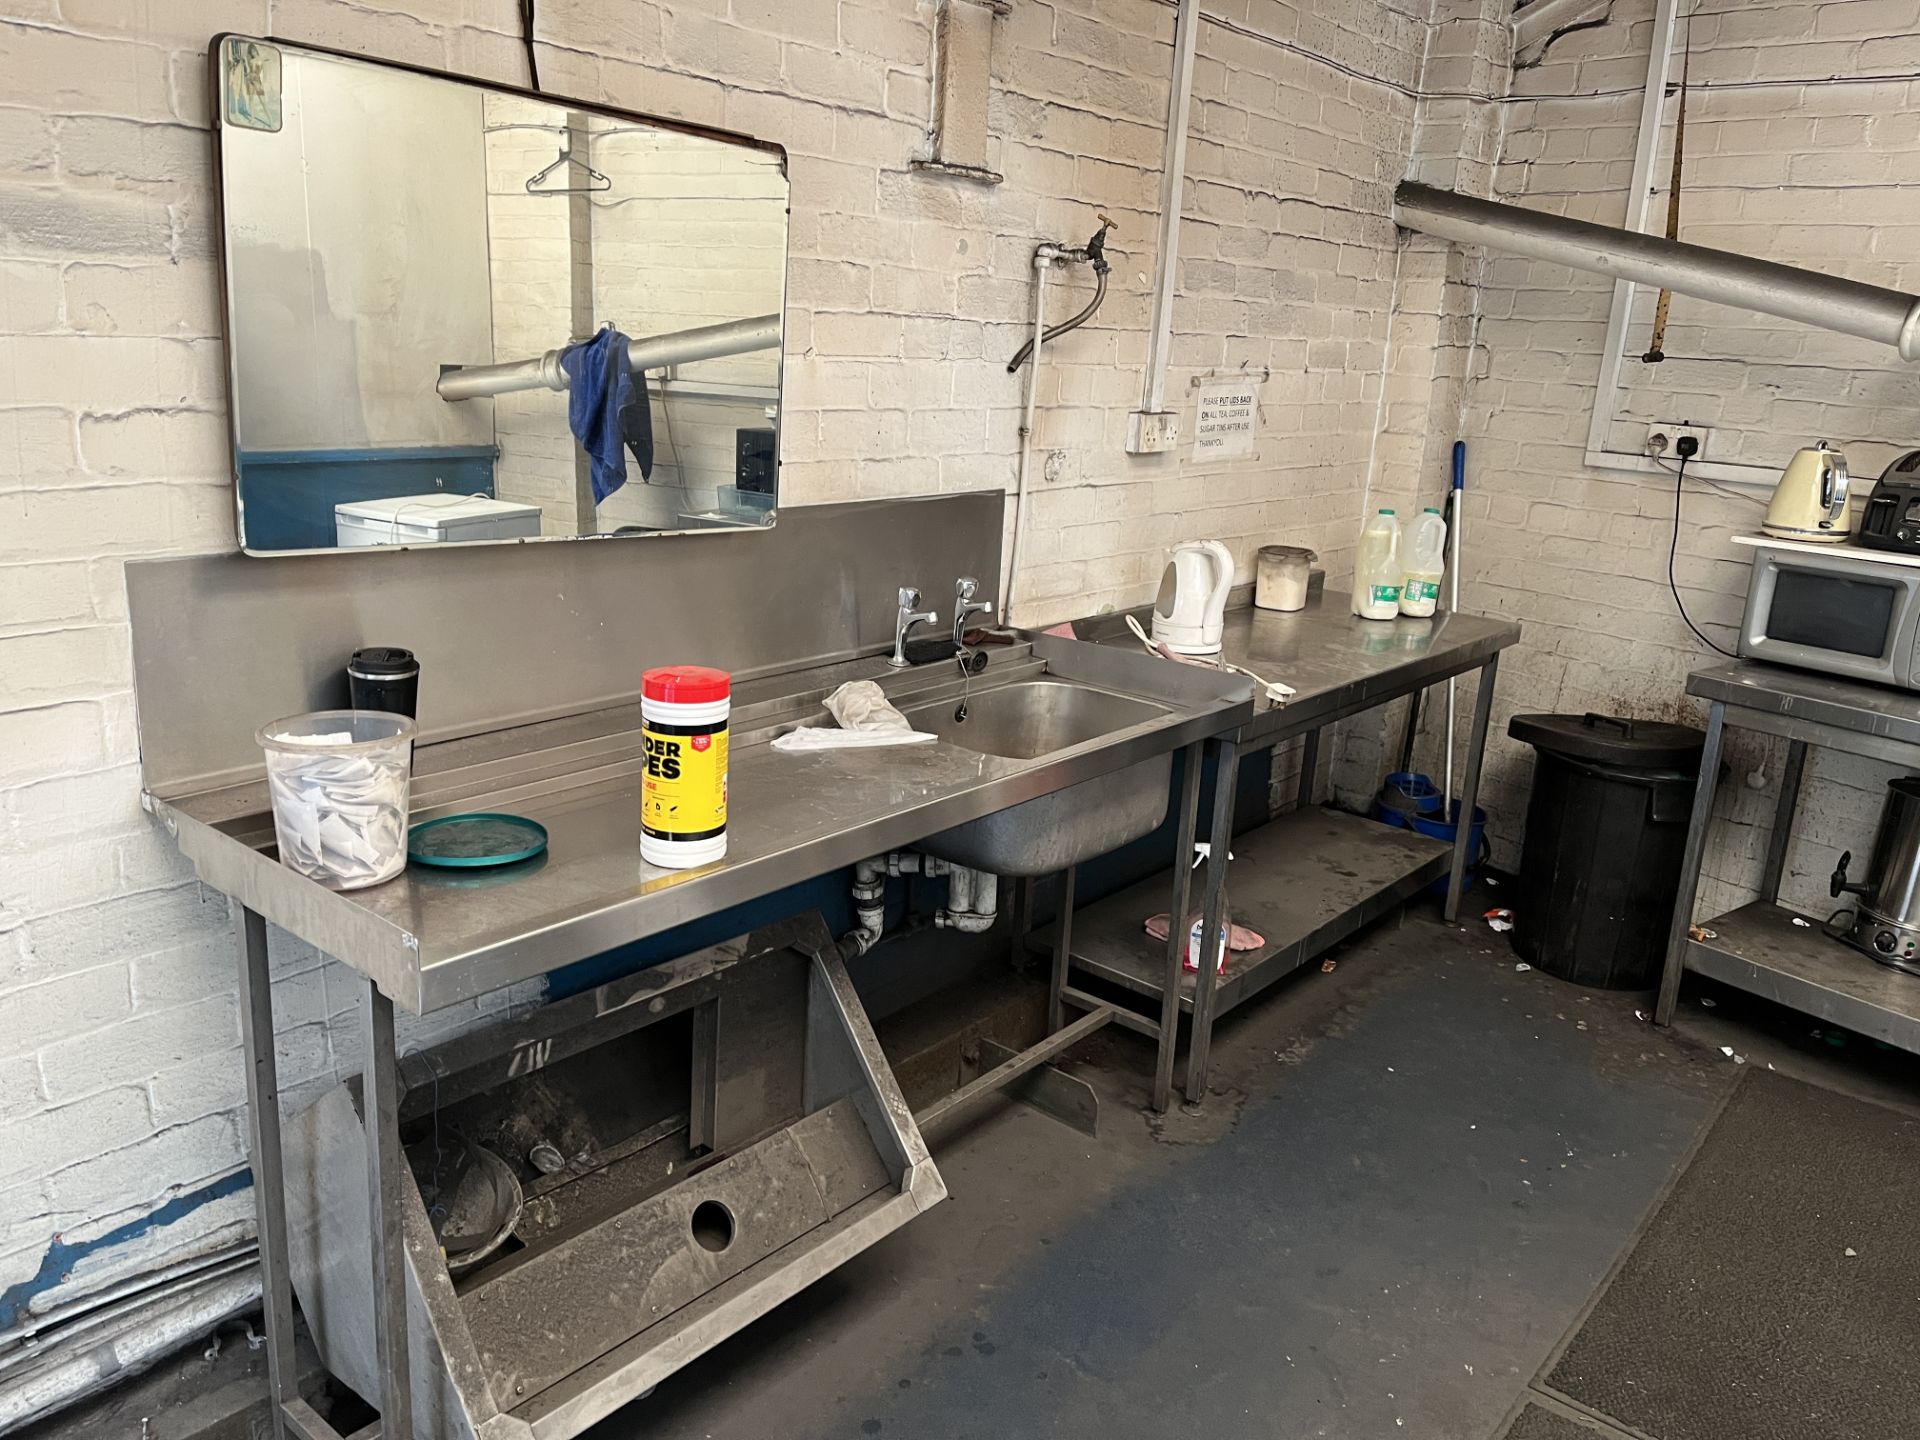 CONTENTS TO CANTEEN TO INCLUDE STAINLESS STEEL BENCHES, STAINLESS STEEL WORKSTAION, MICROWAVES, - Image 3 of 4